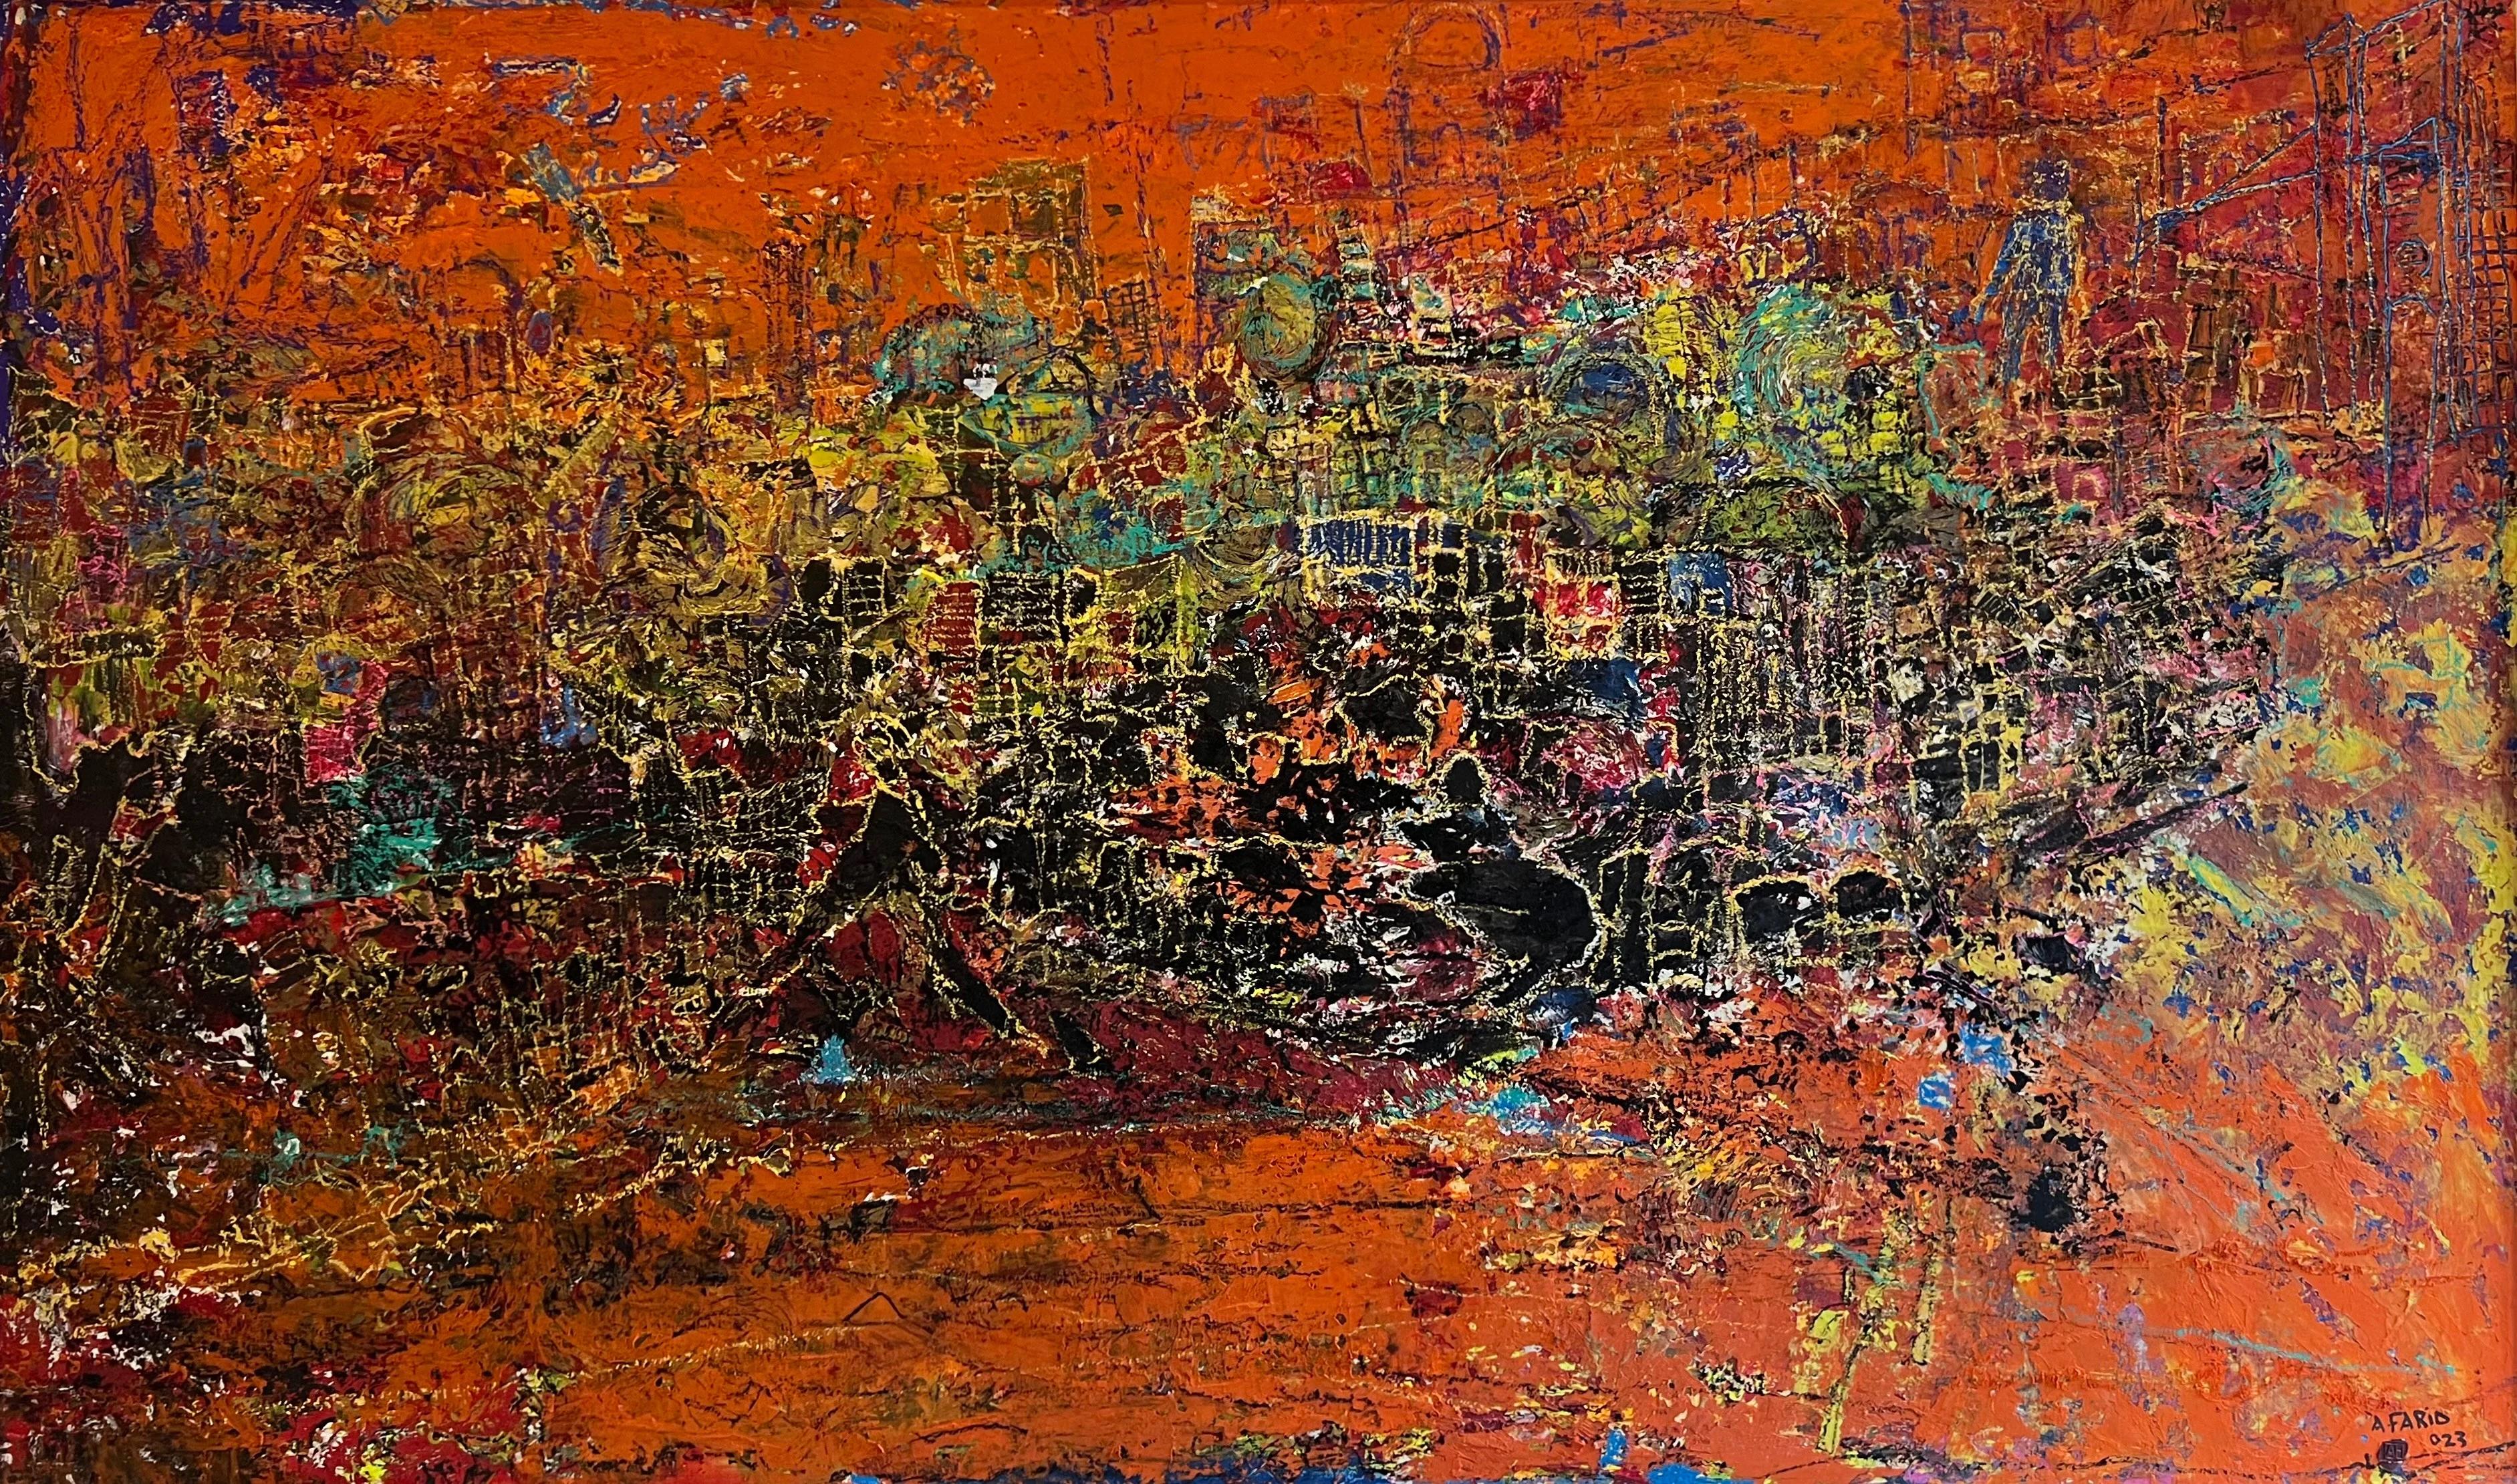 "Lava" Abstract Mixed Media Painting 47" x 79" inch by Ahmed Farid

mixed media on canvas

Born in Cairo, Egypt, in 1950 where he currently lives and works, Farid is an autodidact Egyptian painters who trained privately in immersion apprenticeship